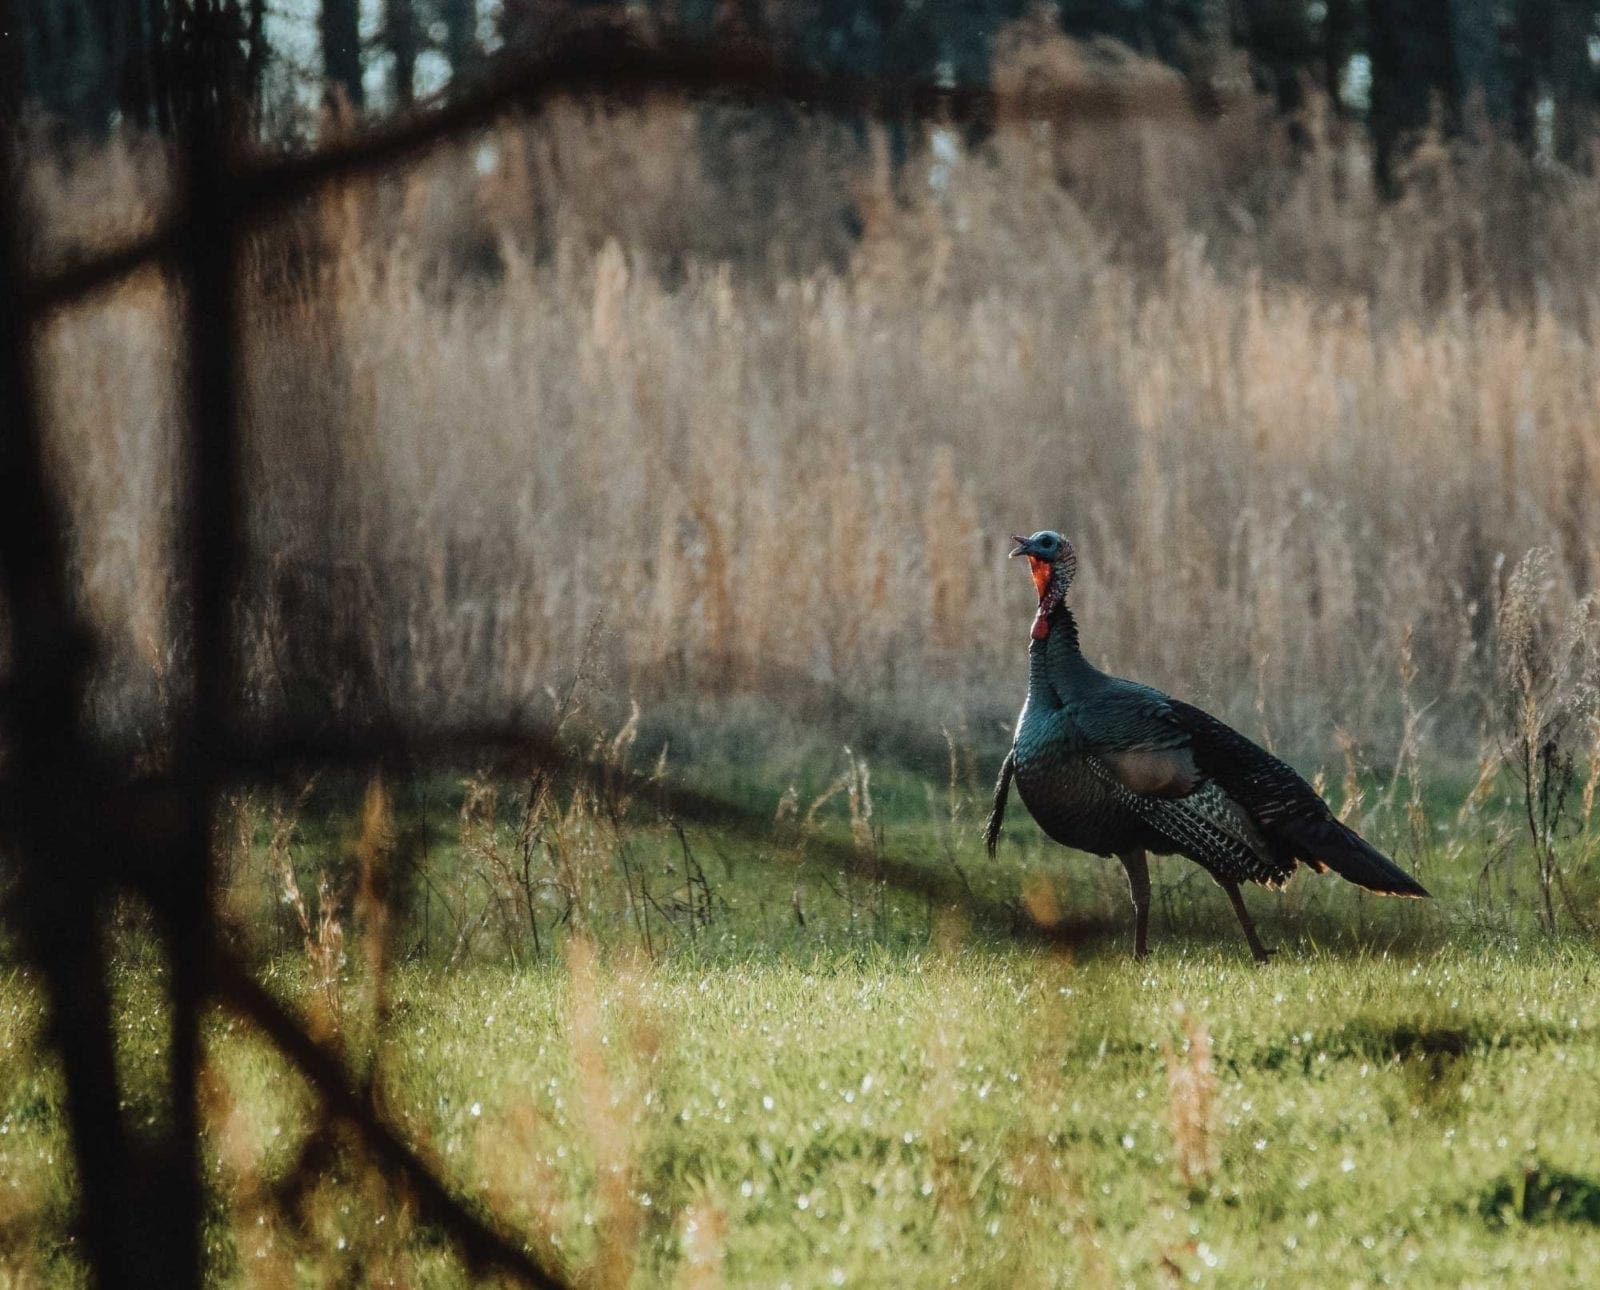 A wild turkey moves silently along the edge of a field.